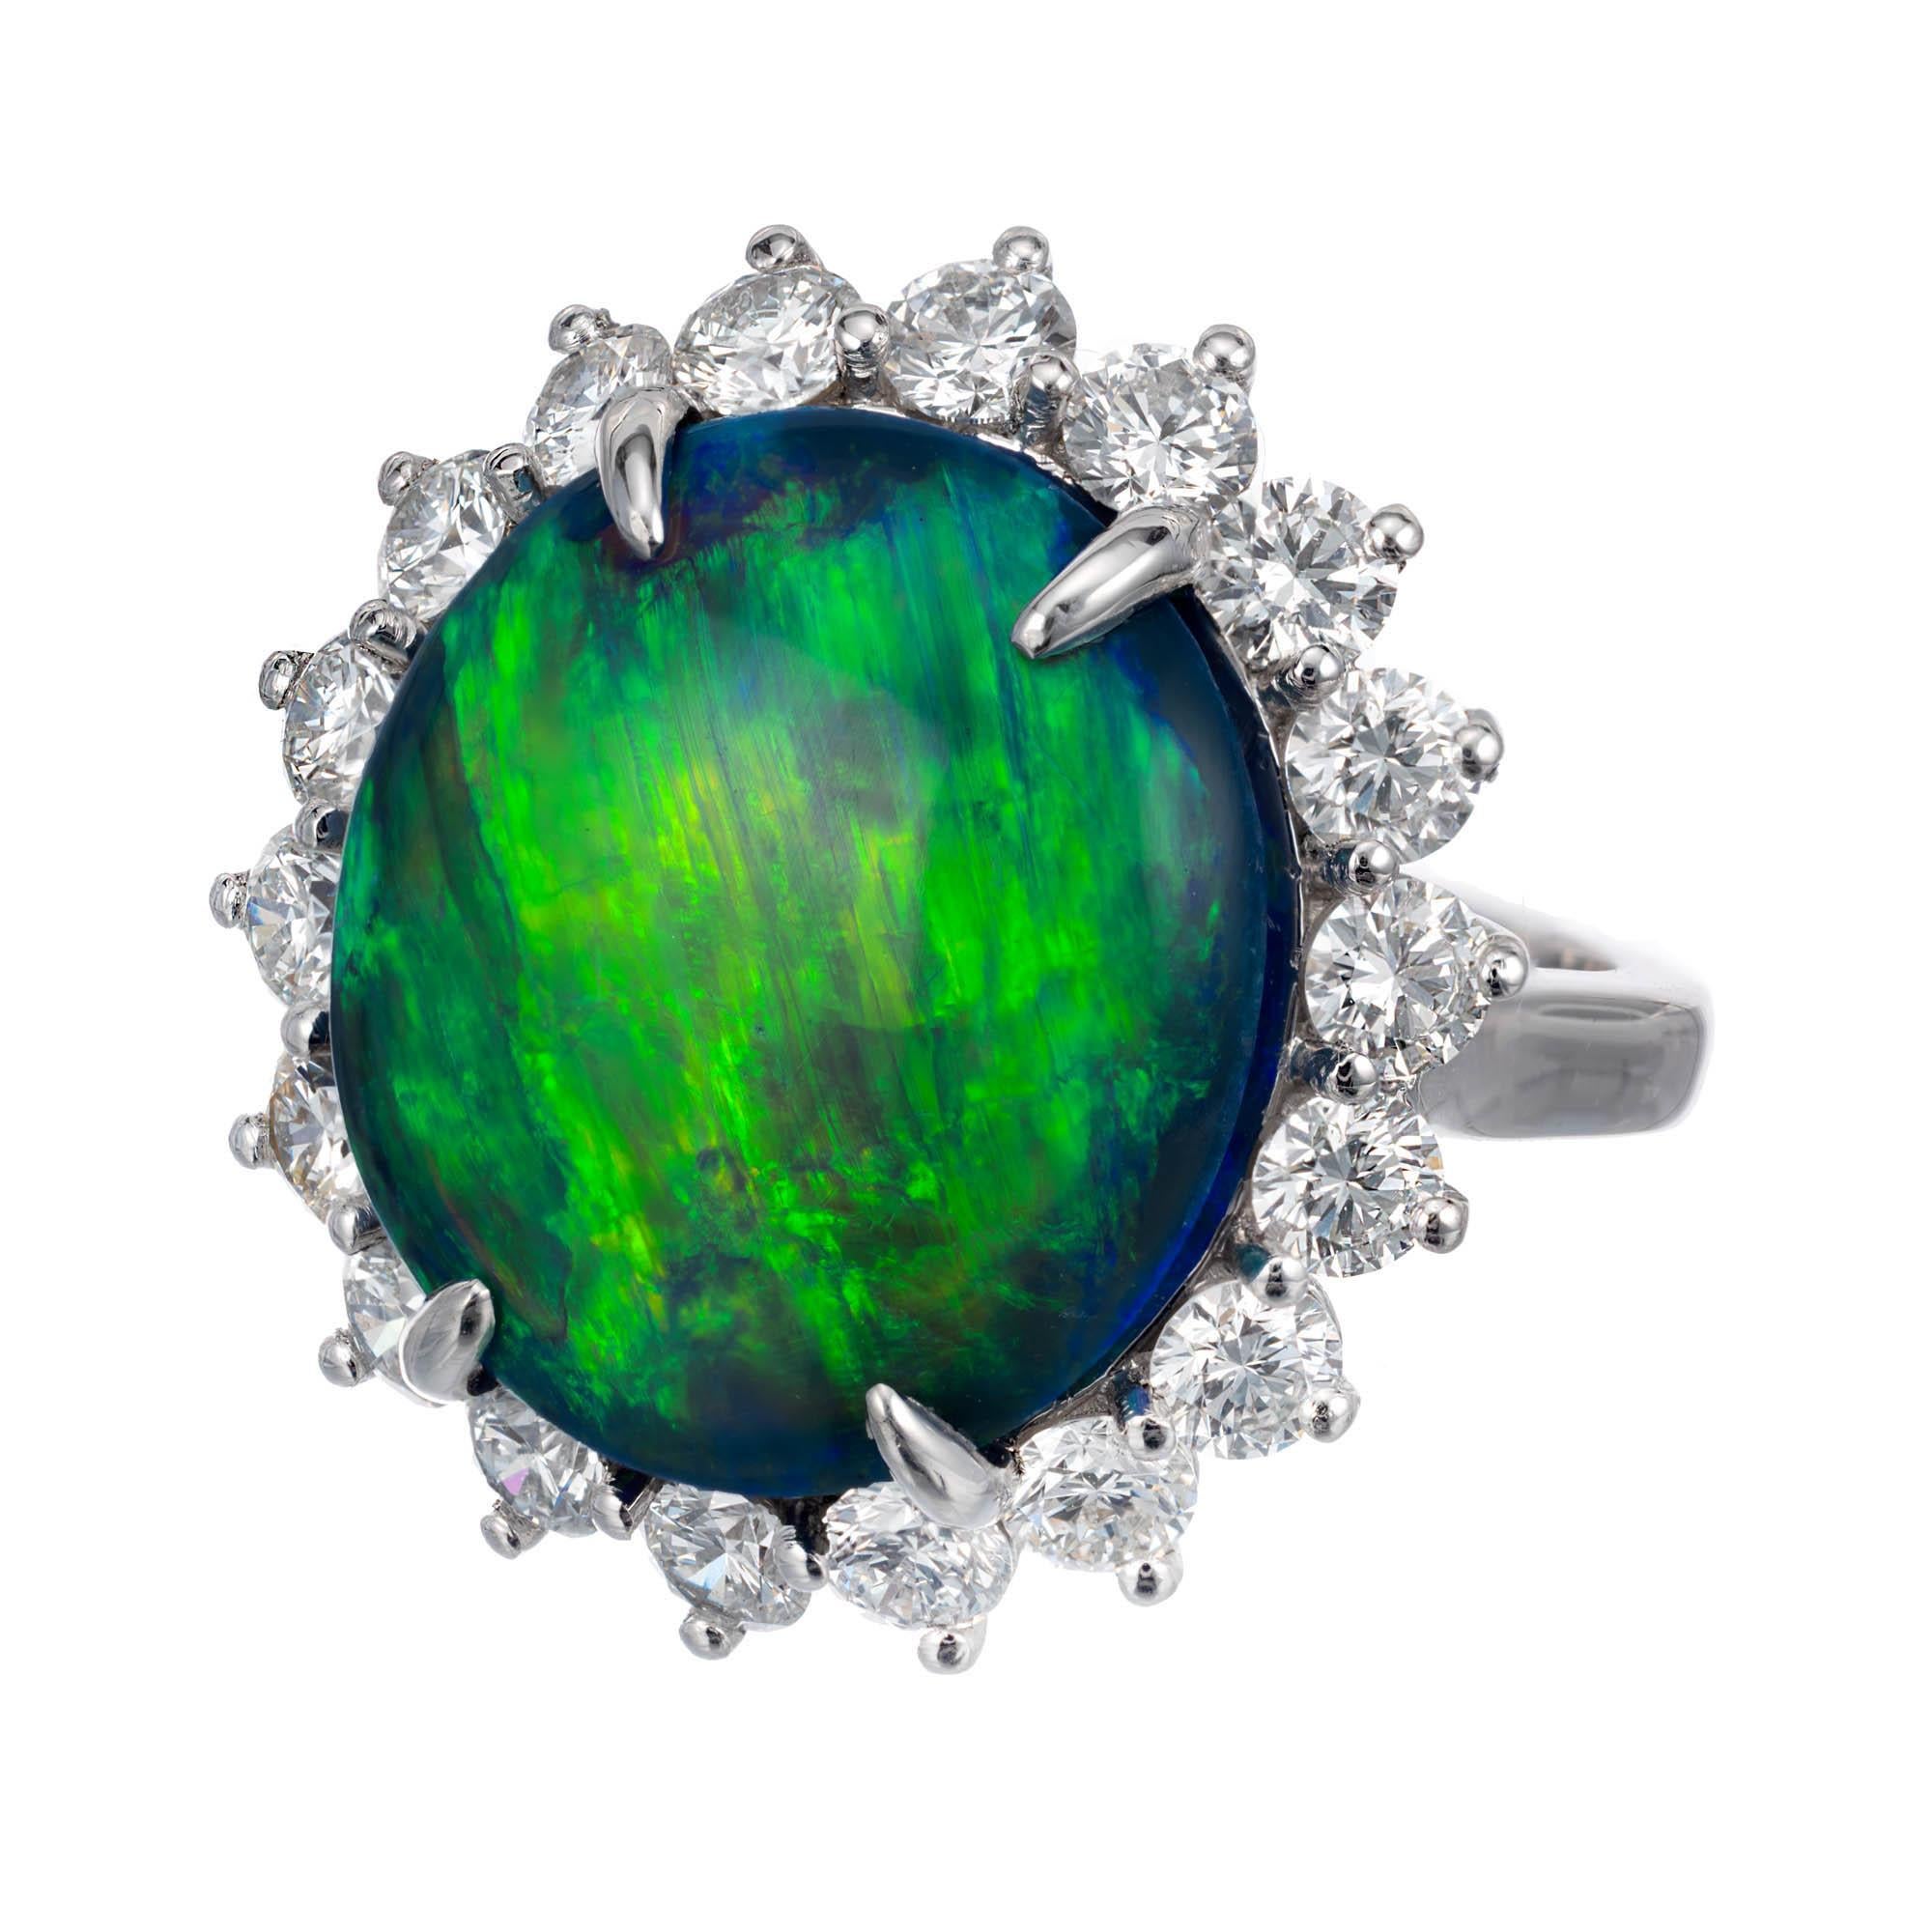 7.55 Carat black opal and diamond halo cocktail ring. Cabochon black opal set in platinum setting with a halo of round diamonds. Gia Certified. The opal is from an estate circa 1950. Vivid green, blue and black colors. The ring was designed and